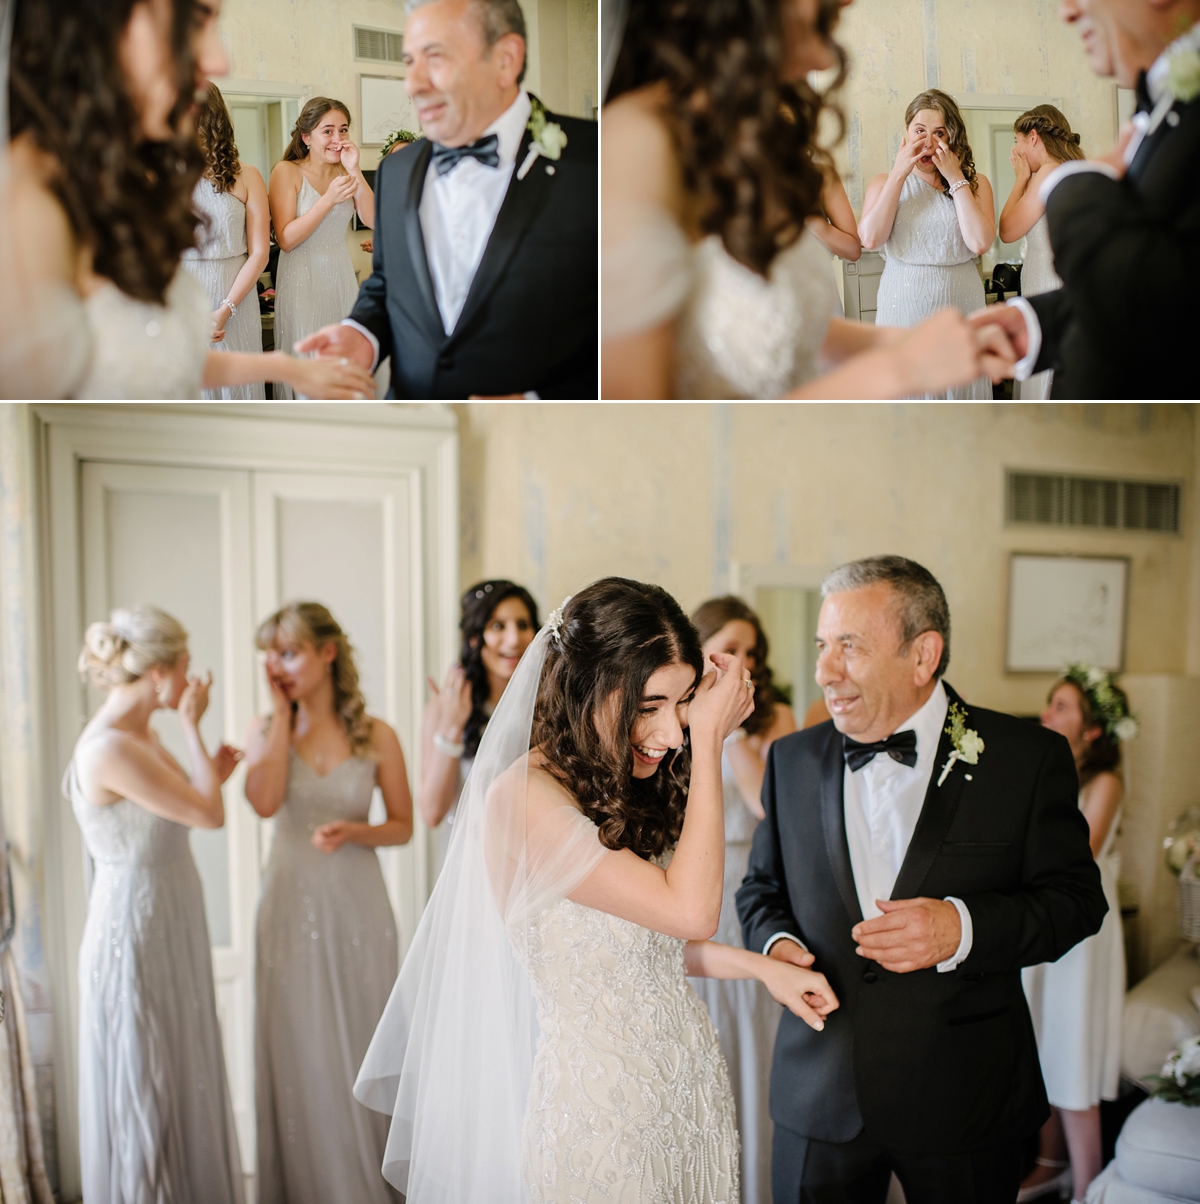 19 A Monique Lhuillier gown for a romantic summer villa wedding on Lake Como in Italy